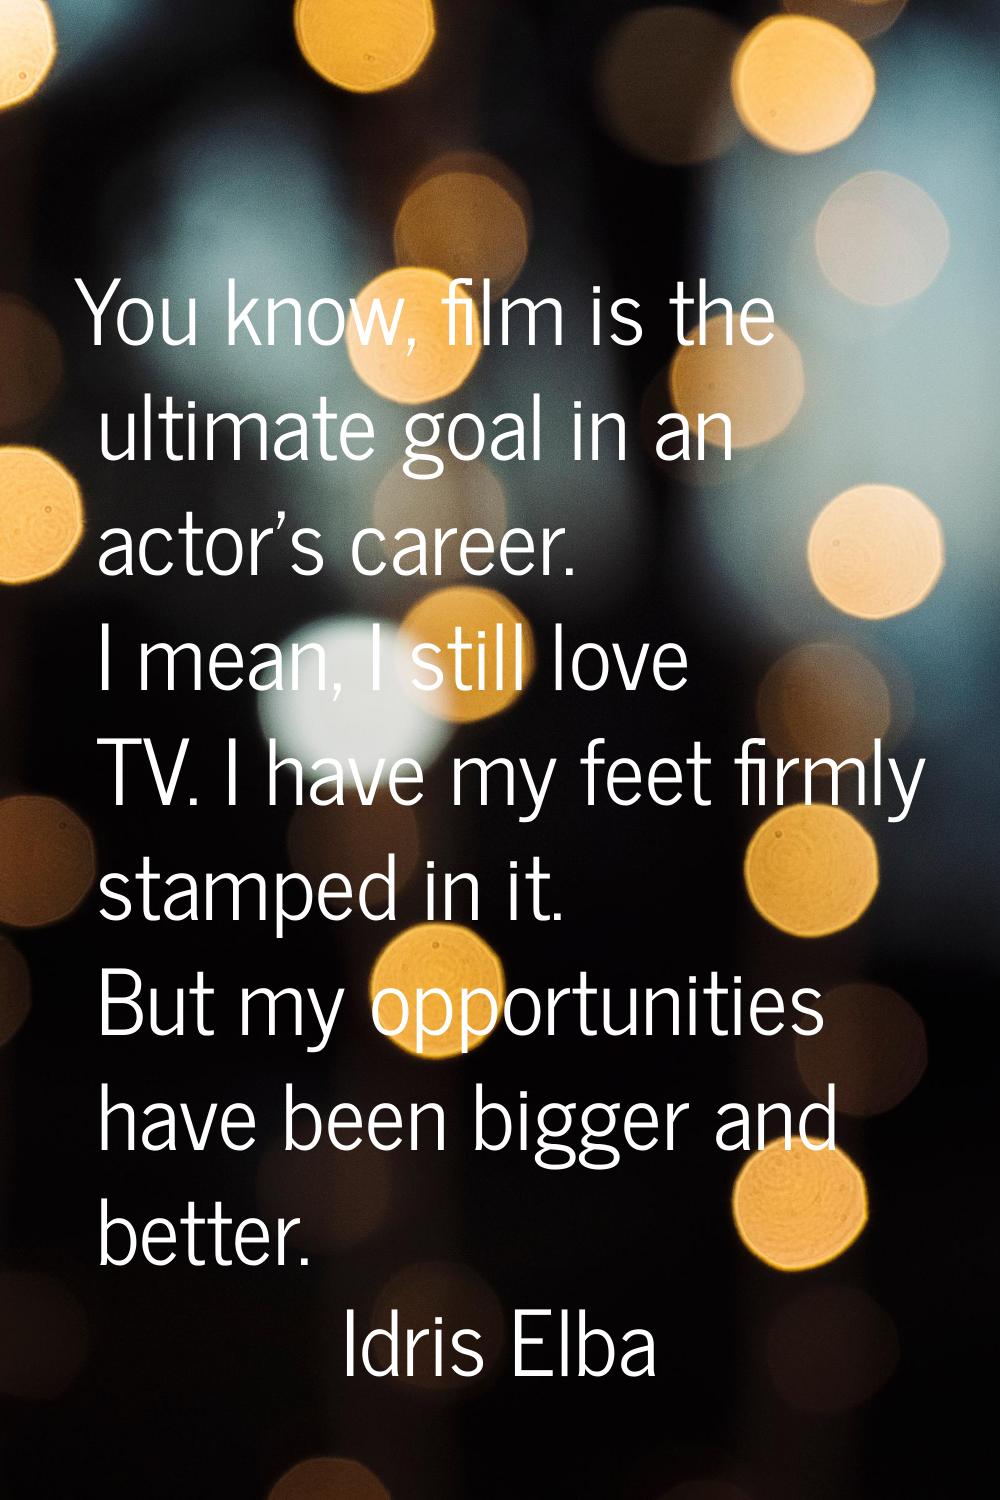 You know, film is the ultimate goal in an actor's career. I mean, I still love TV. I have my feet f